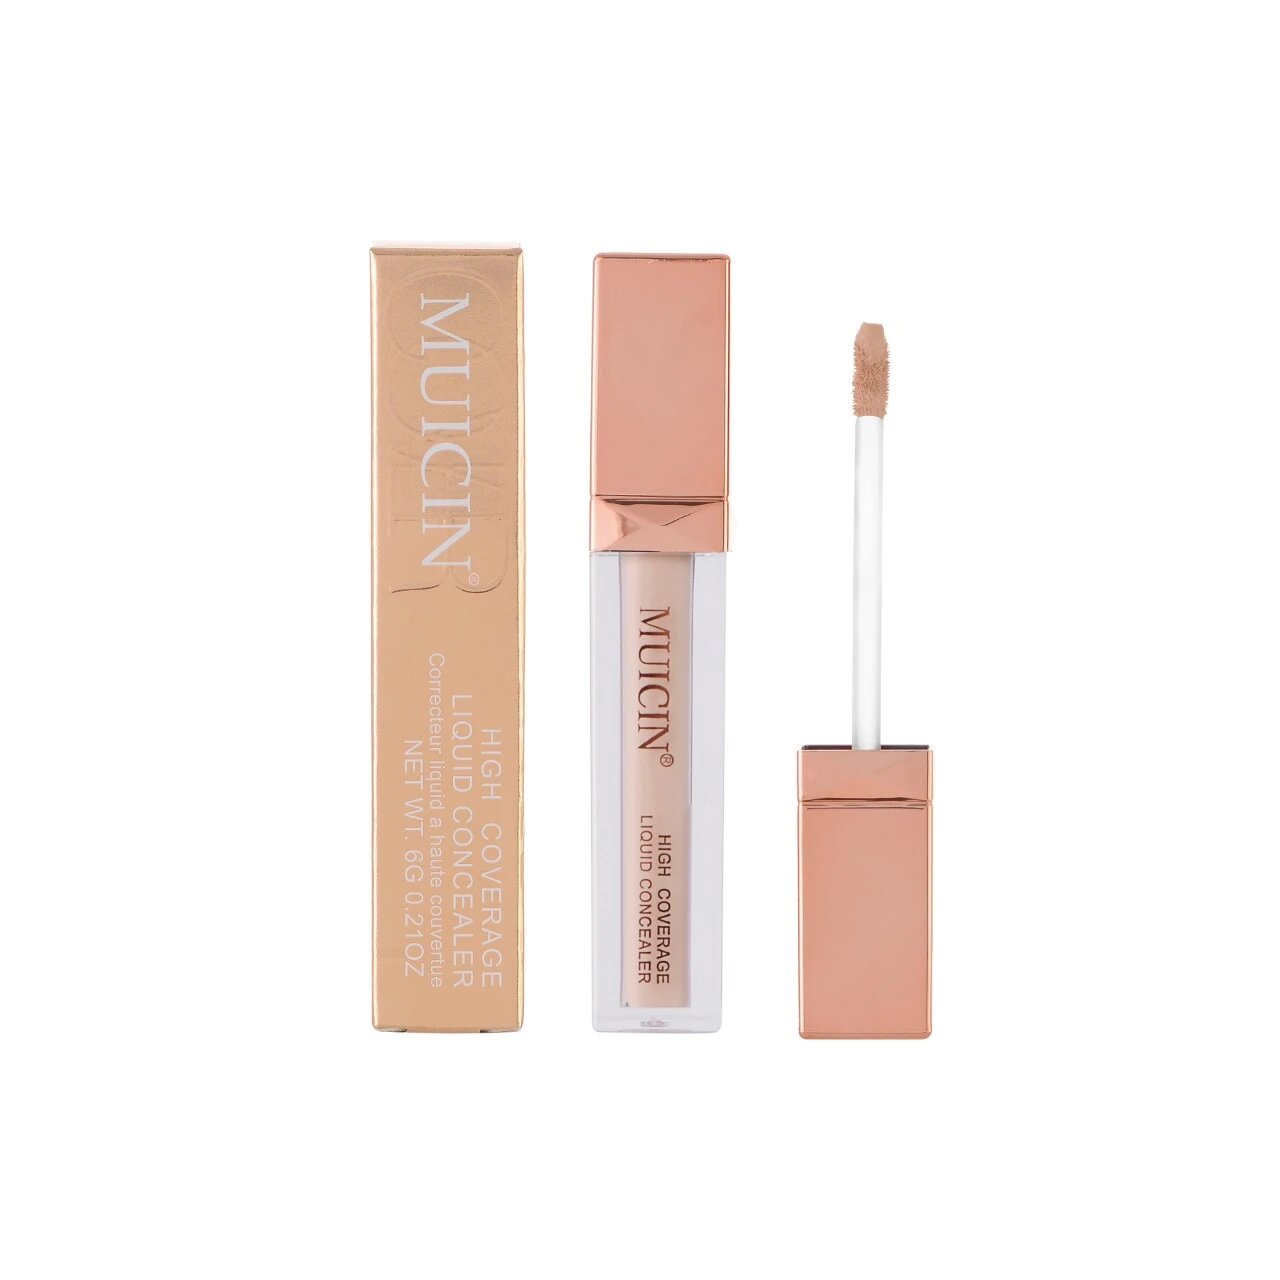 GOLDEN RADIANCE HD COVERAGE LIQUID CONCEALER - LUXURIOUS COVERAGE